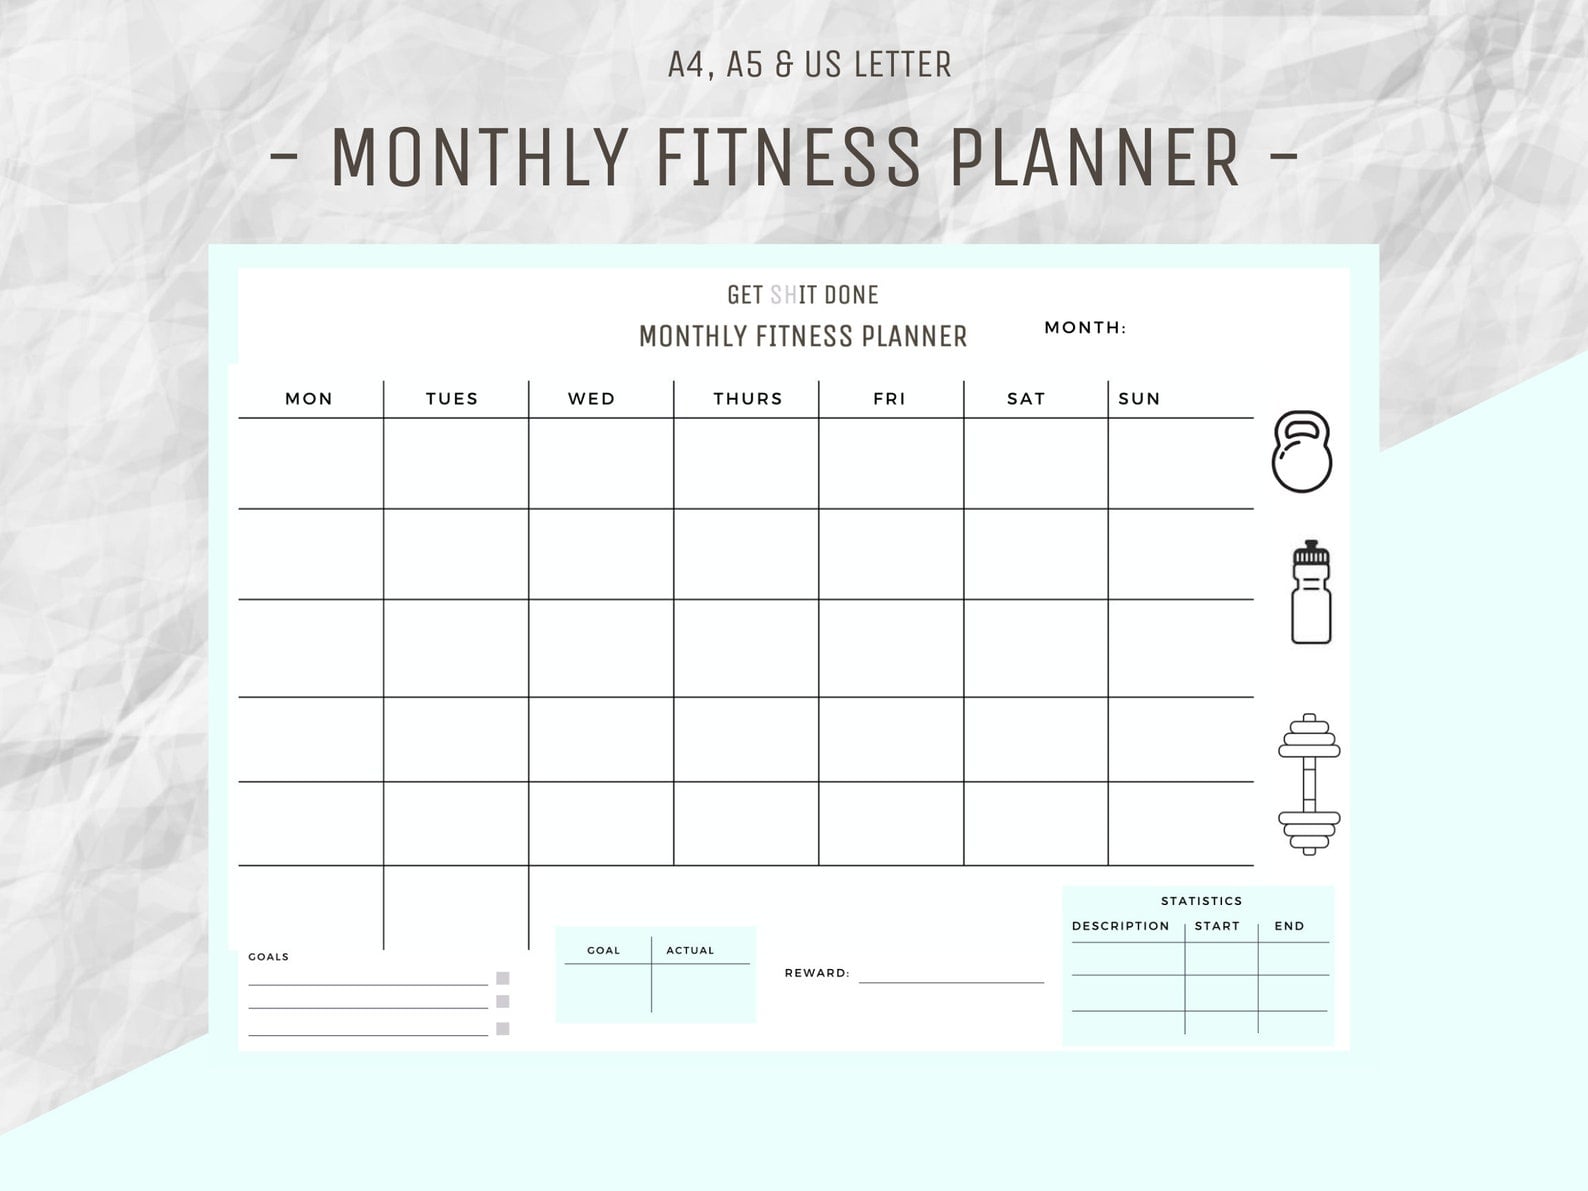 paper-party-supplies-fitness-planner-printable-bundle-goal-setting-health-trackers-standard